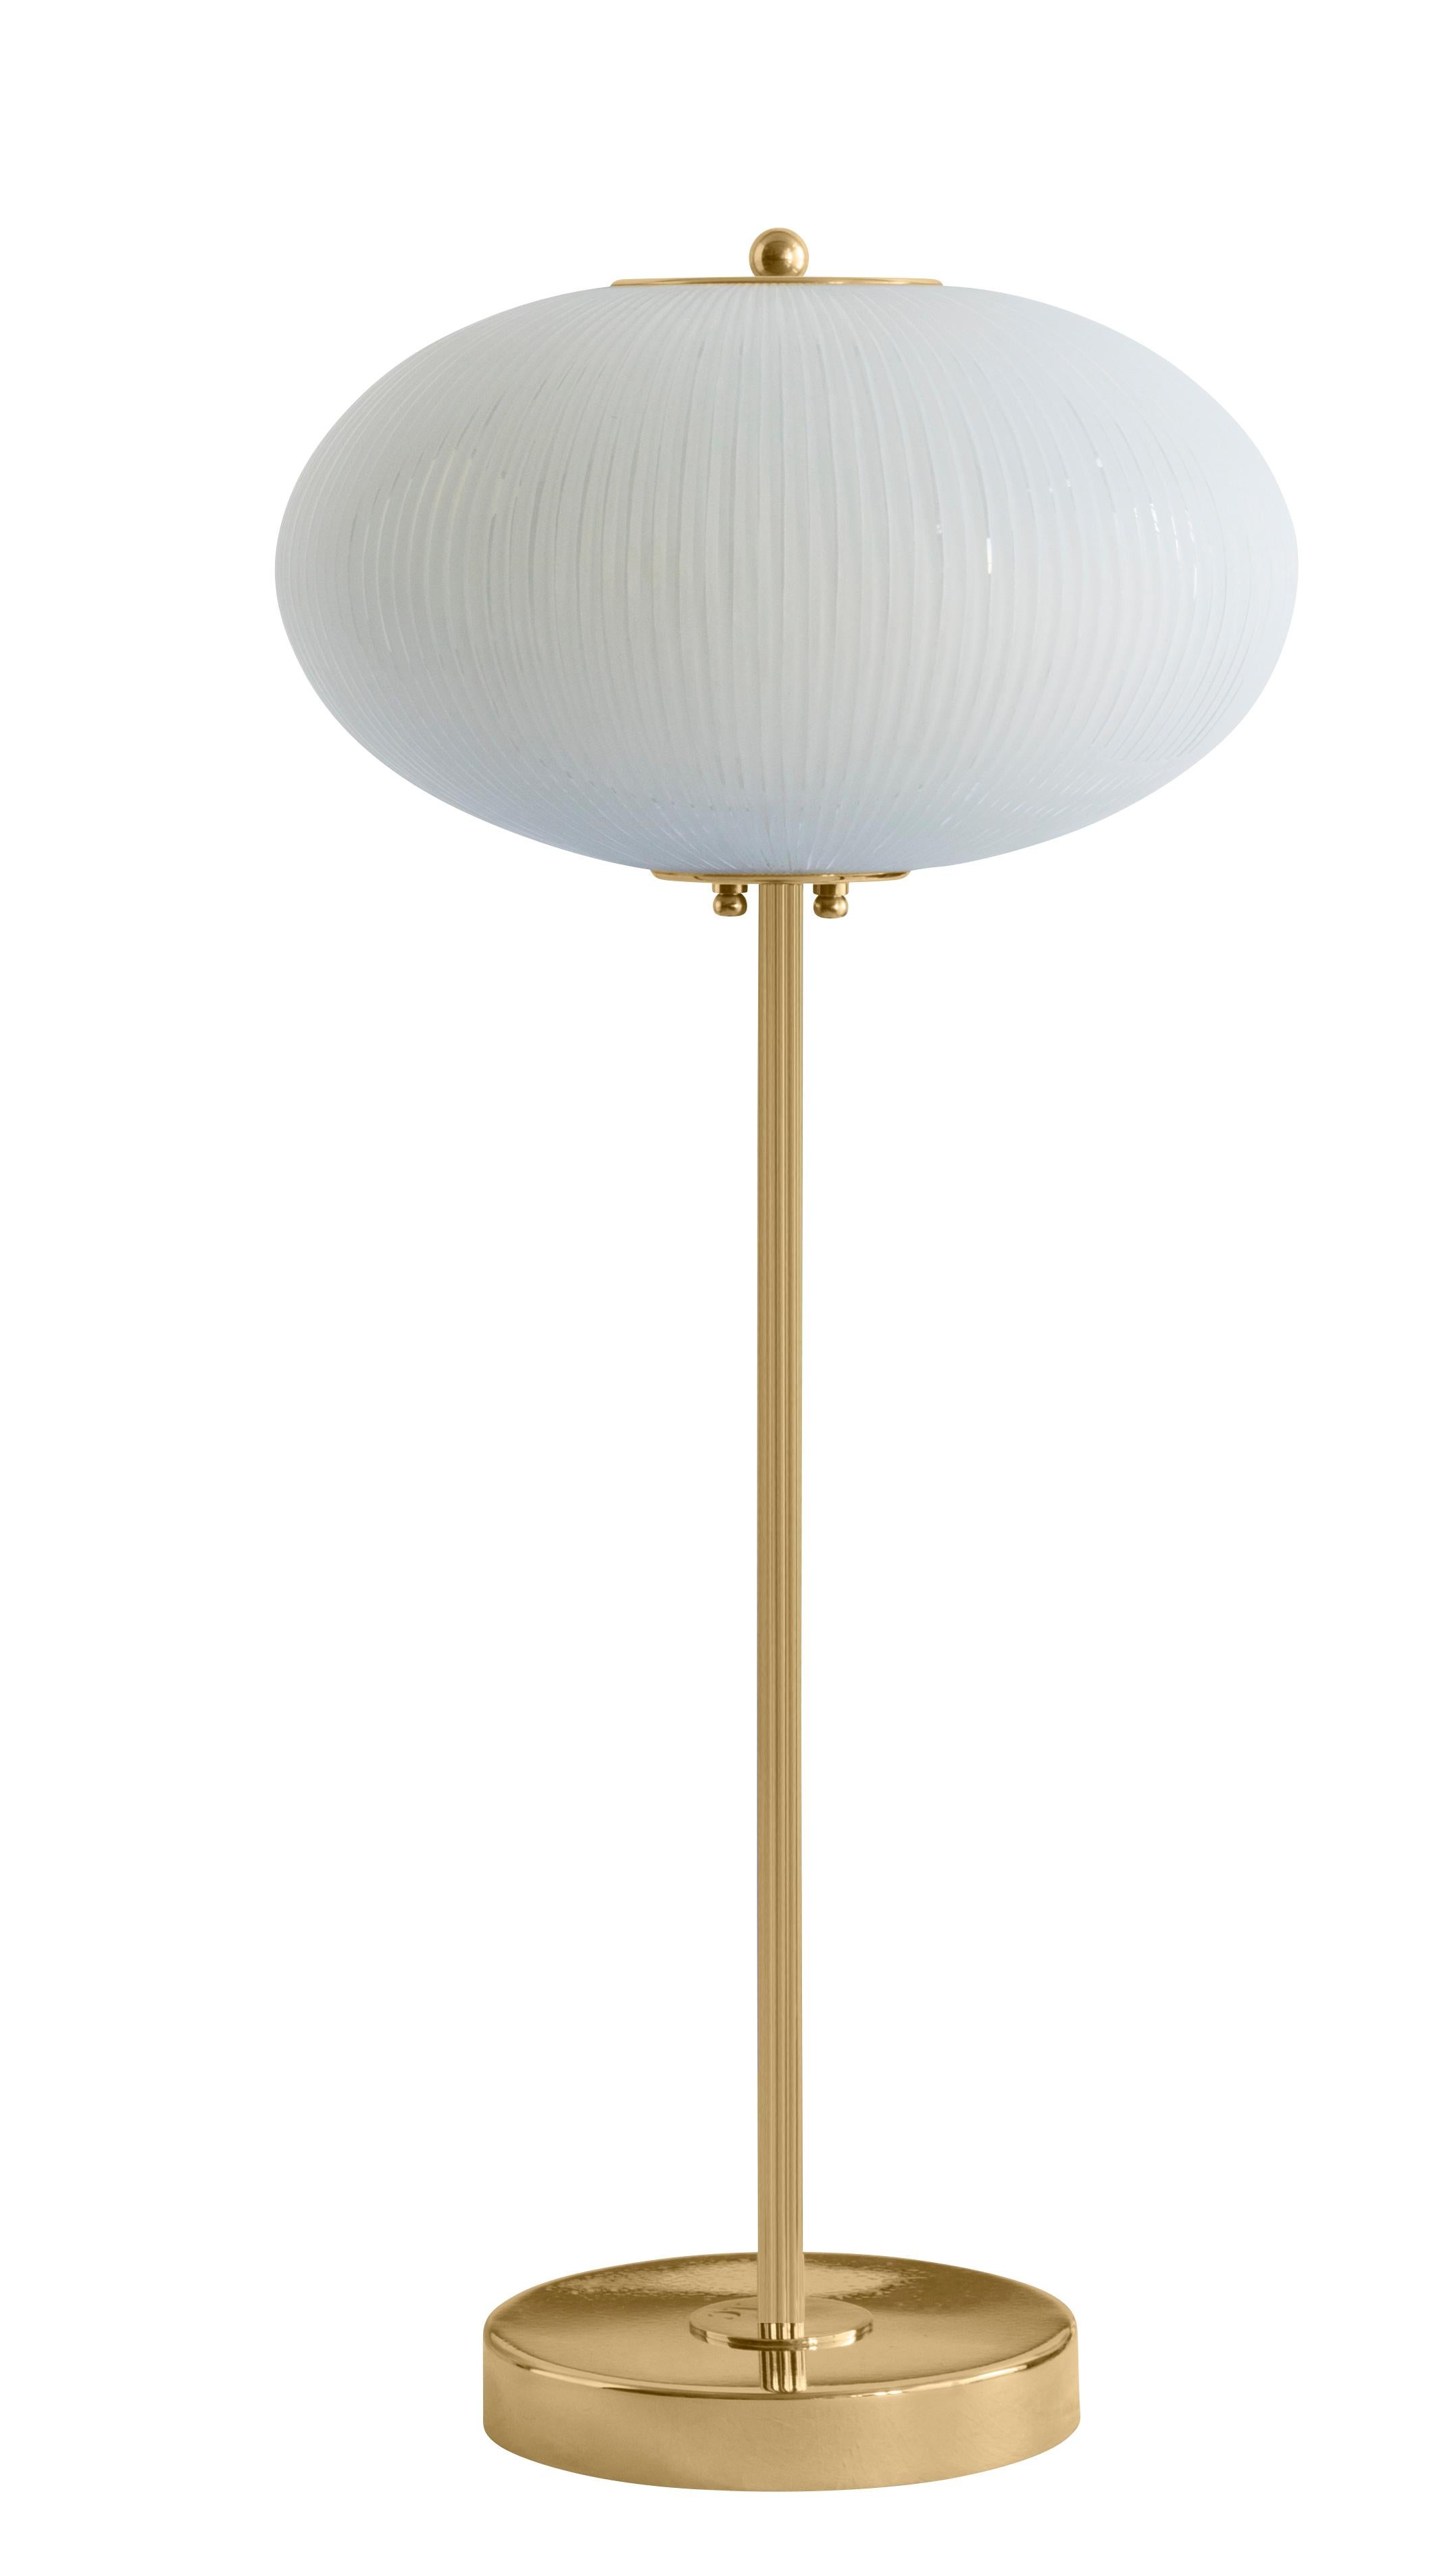 Table lamp China 07 by Magic Circus Editions
Dimensions: H 70 x W 32 x D 32 cm
Materials: Brass, mouth blown glass sculpted with a diamond saw
Colour: rich grey

Available finishes: Brass, nickel
Available colours: enamel soft white, soft